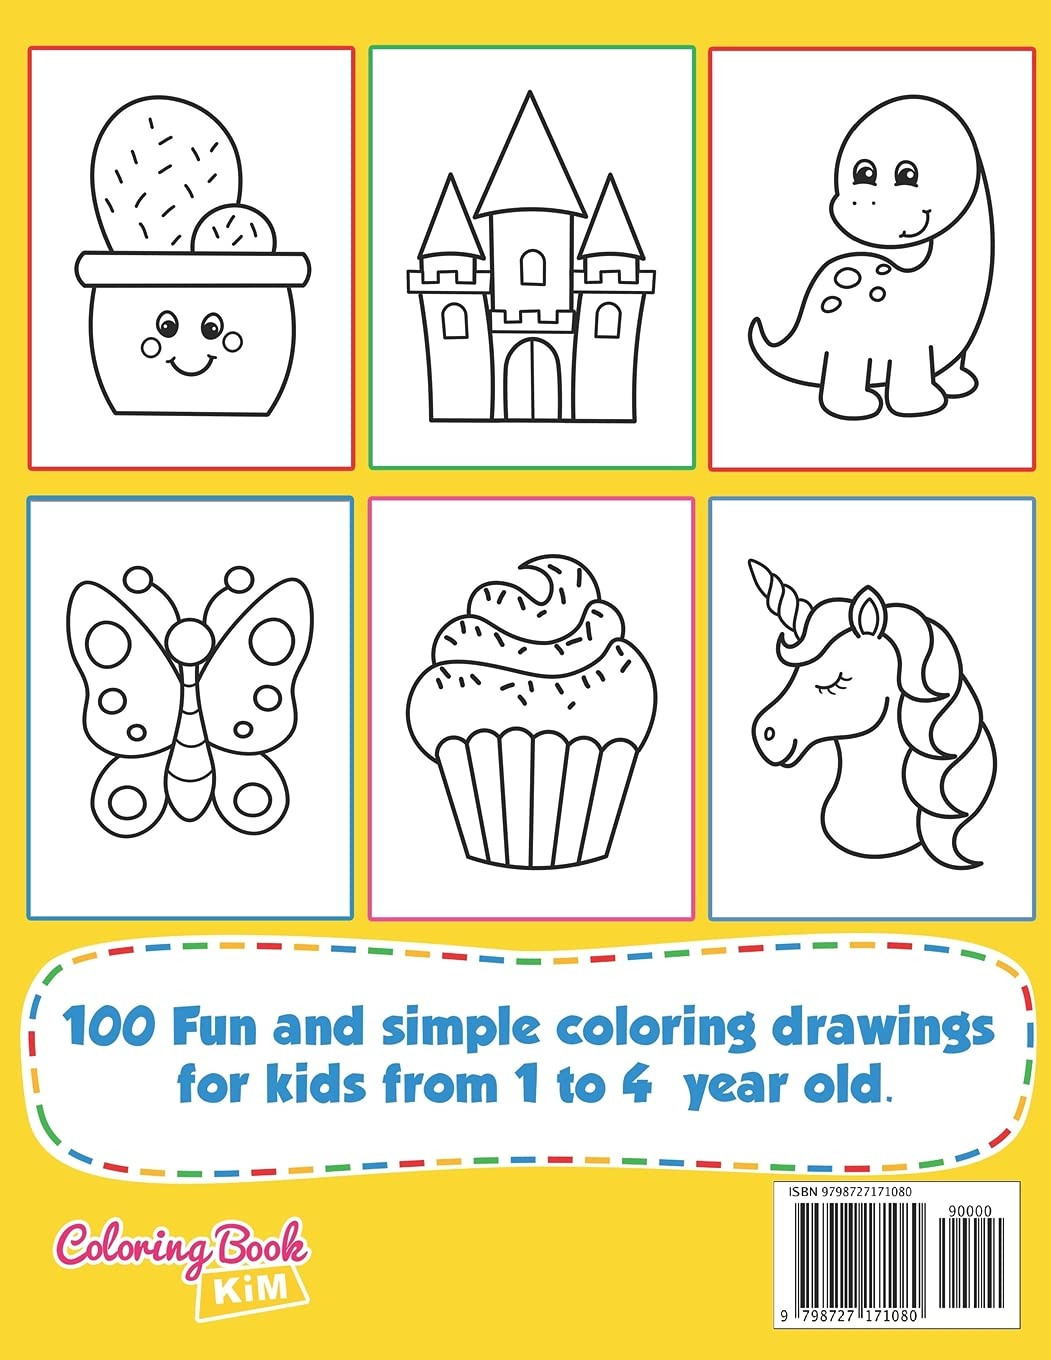 Drawing Book C Art And Craft Book For UKG Kids Age Group 4 To 7